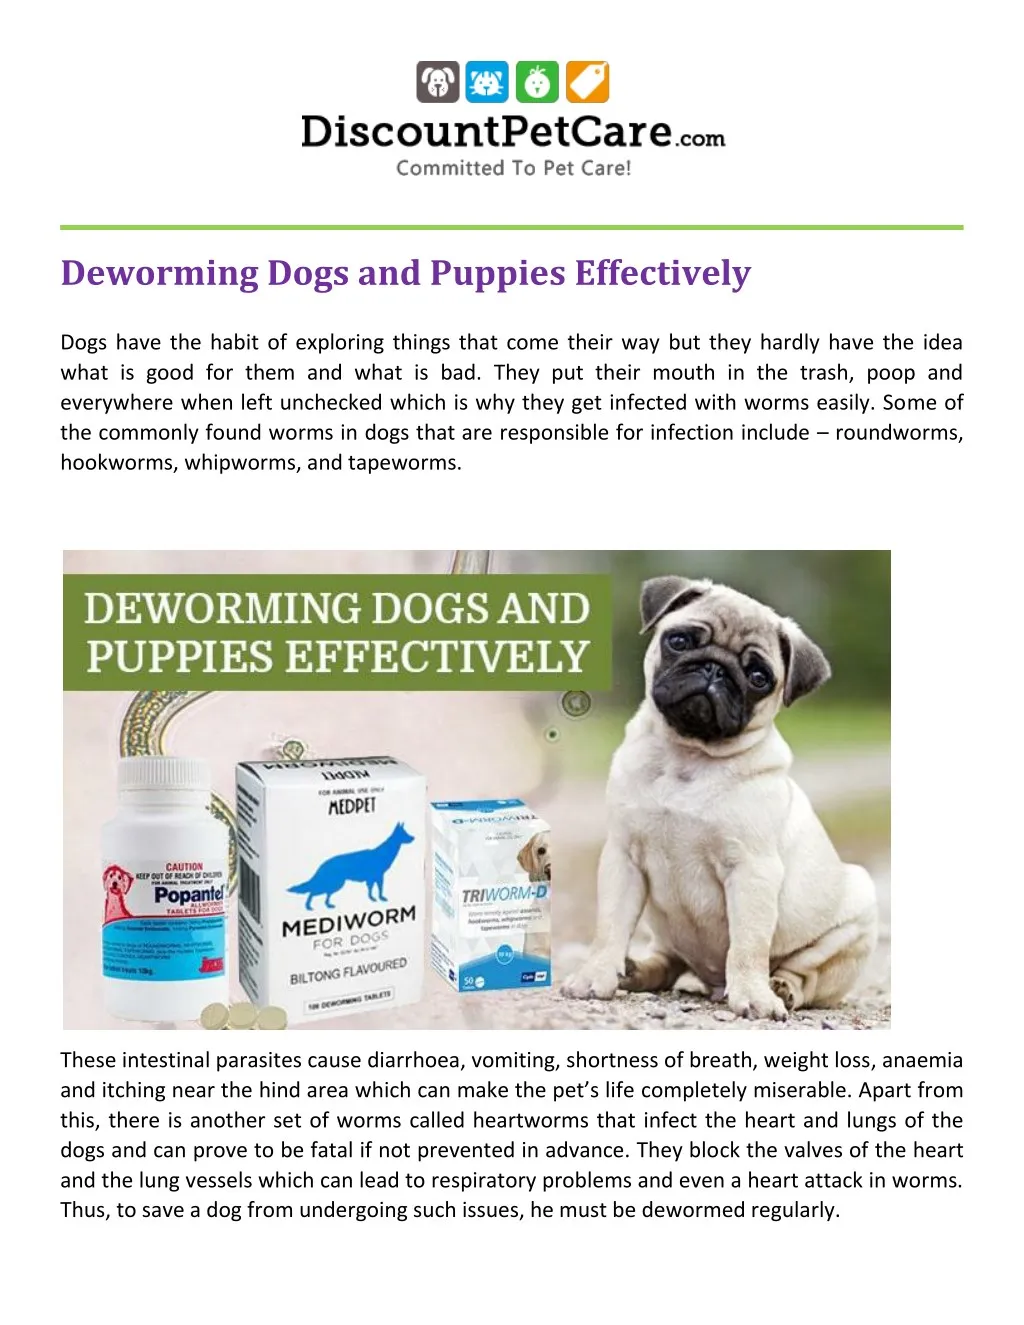 deworming dogs and puppies effectively